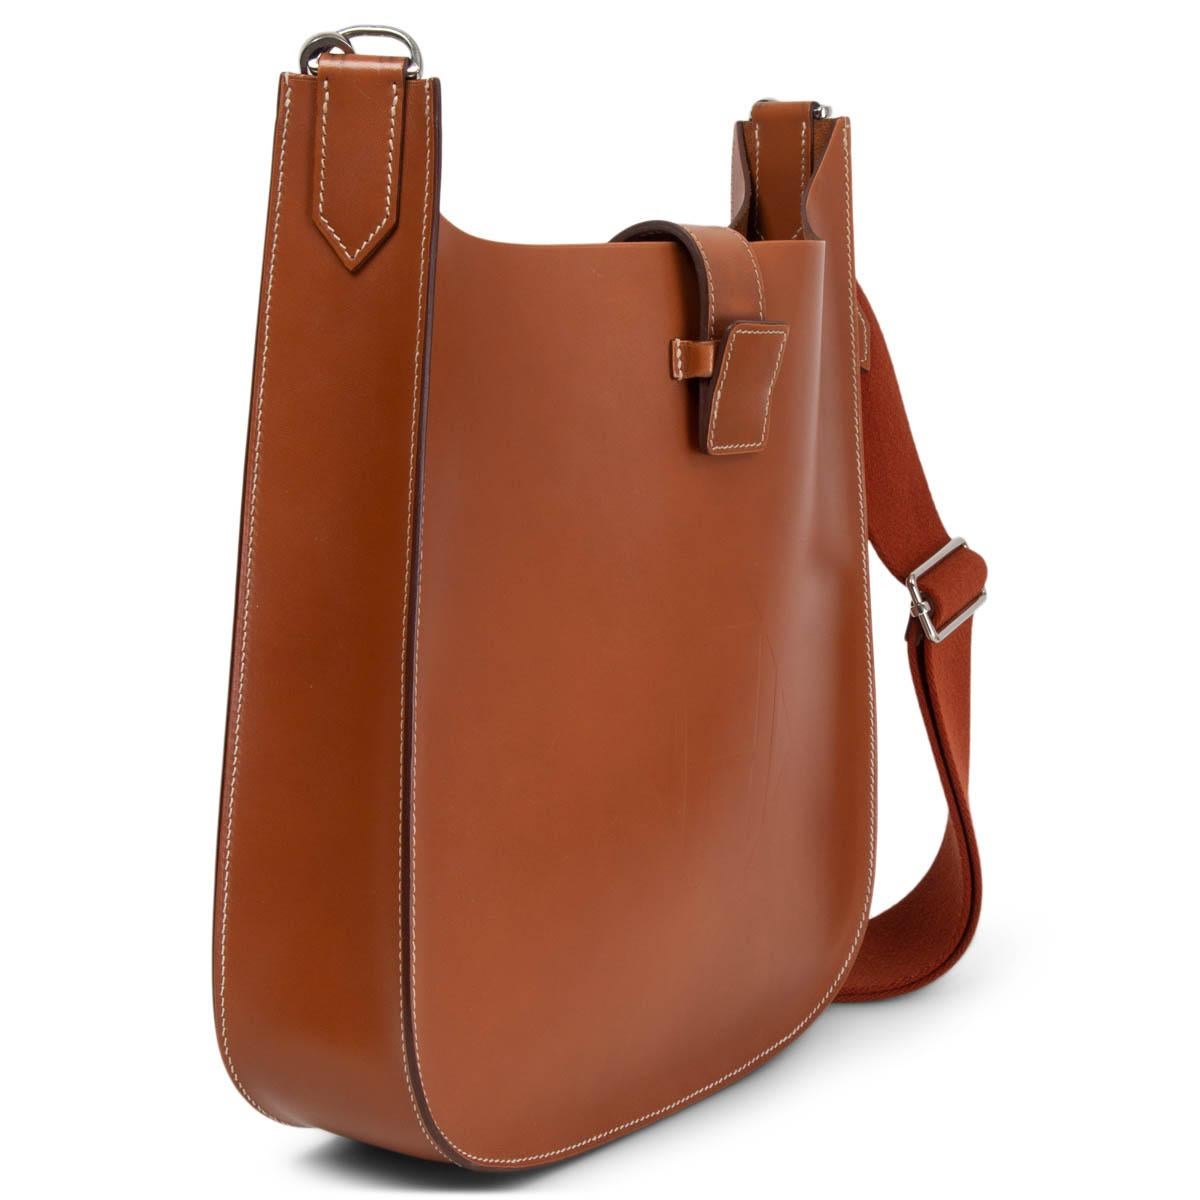 100% authentic Hermès Evelyne 29 Sellier crossbody bag in Gold (cognac brown) Vache Hunter leather. Features a canvas crossbody strap, an embossed Hermes H at the front and palladium hardware. The top opens to a matching suede interior with an